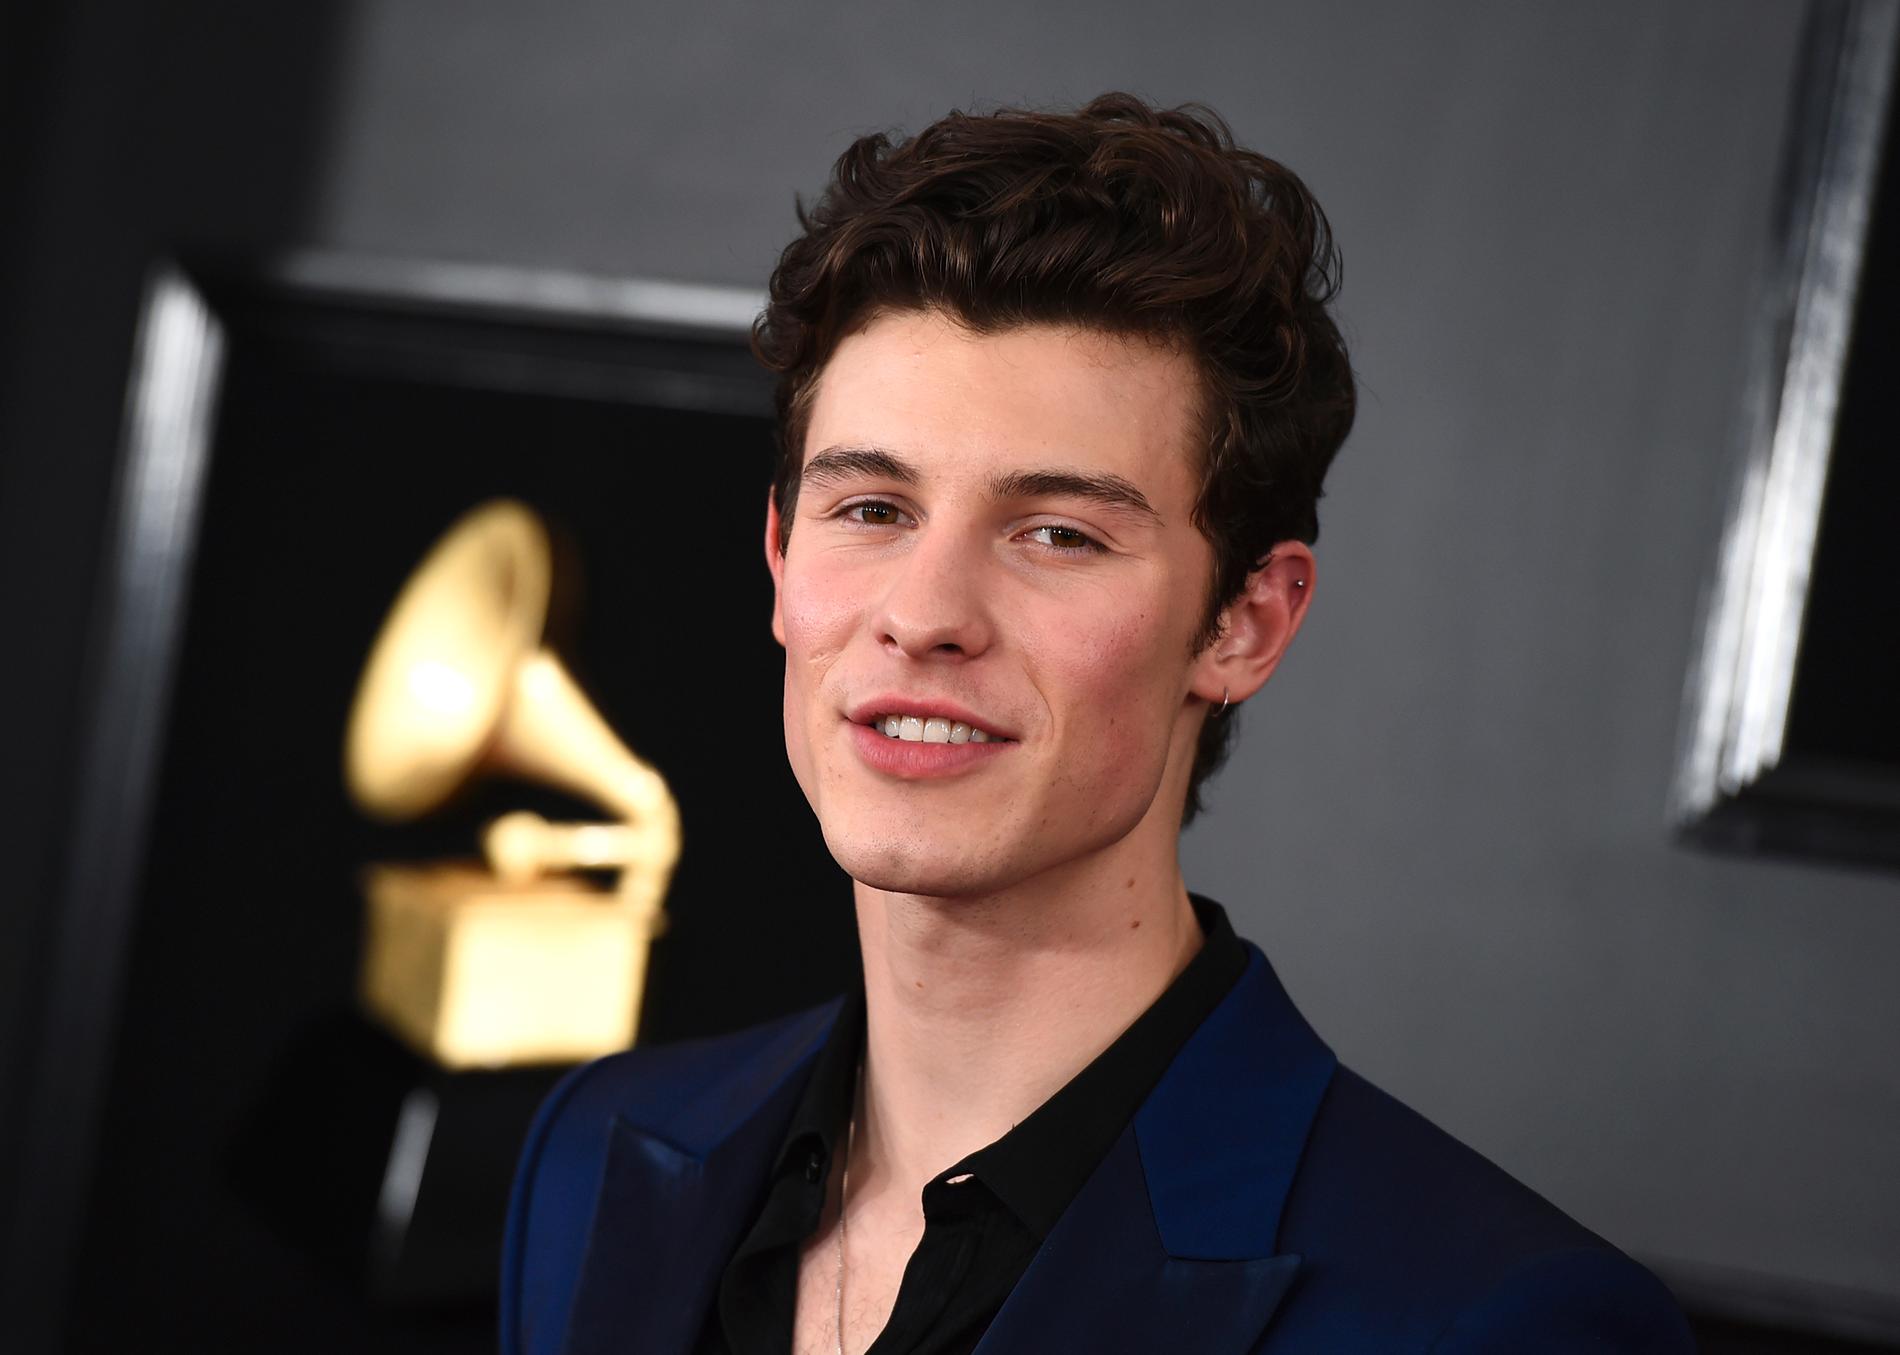 Shawn Mendes.